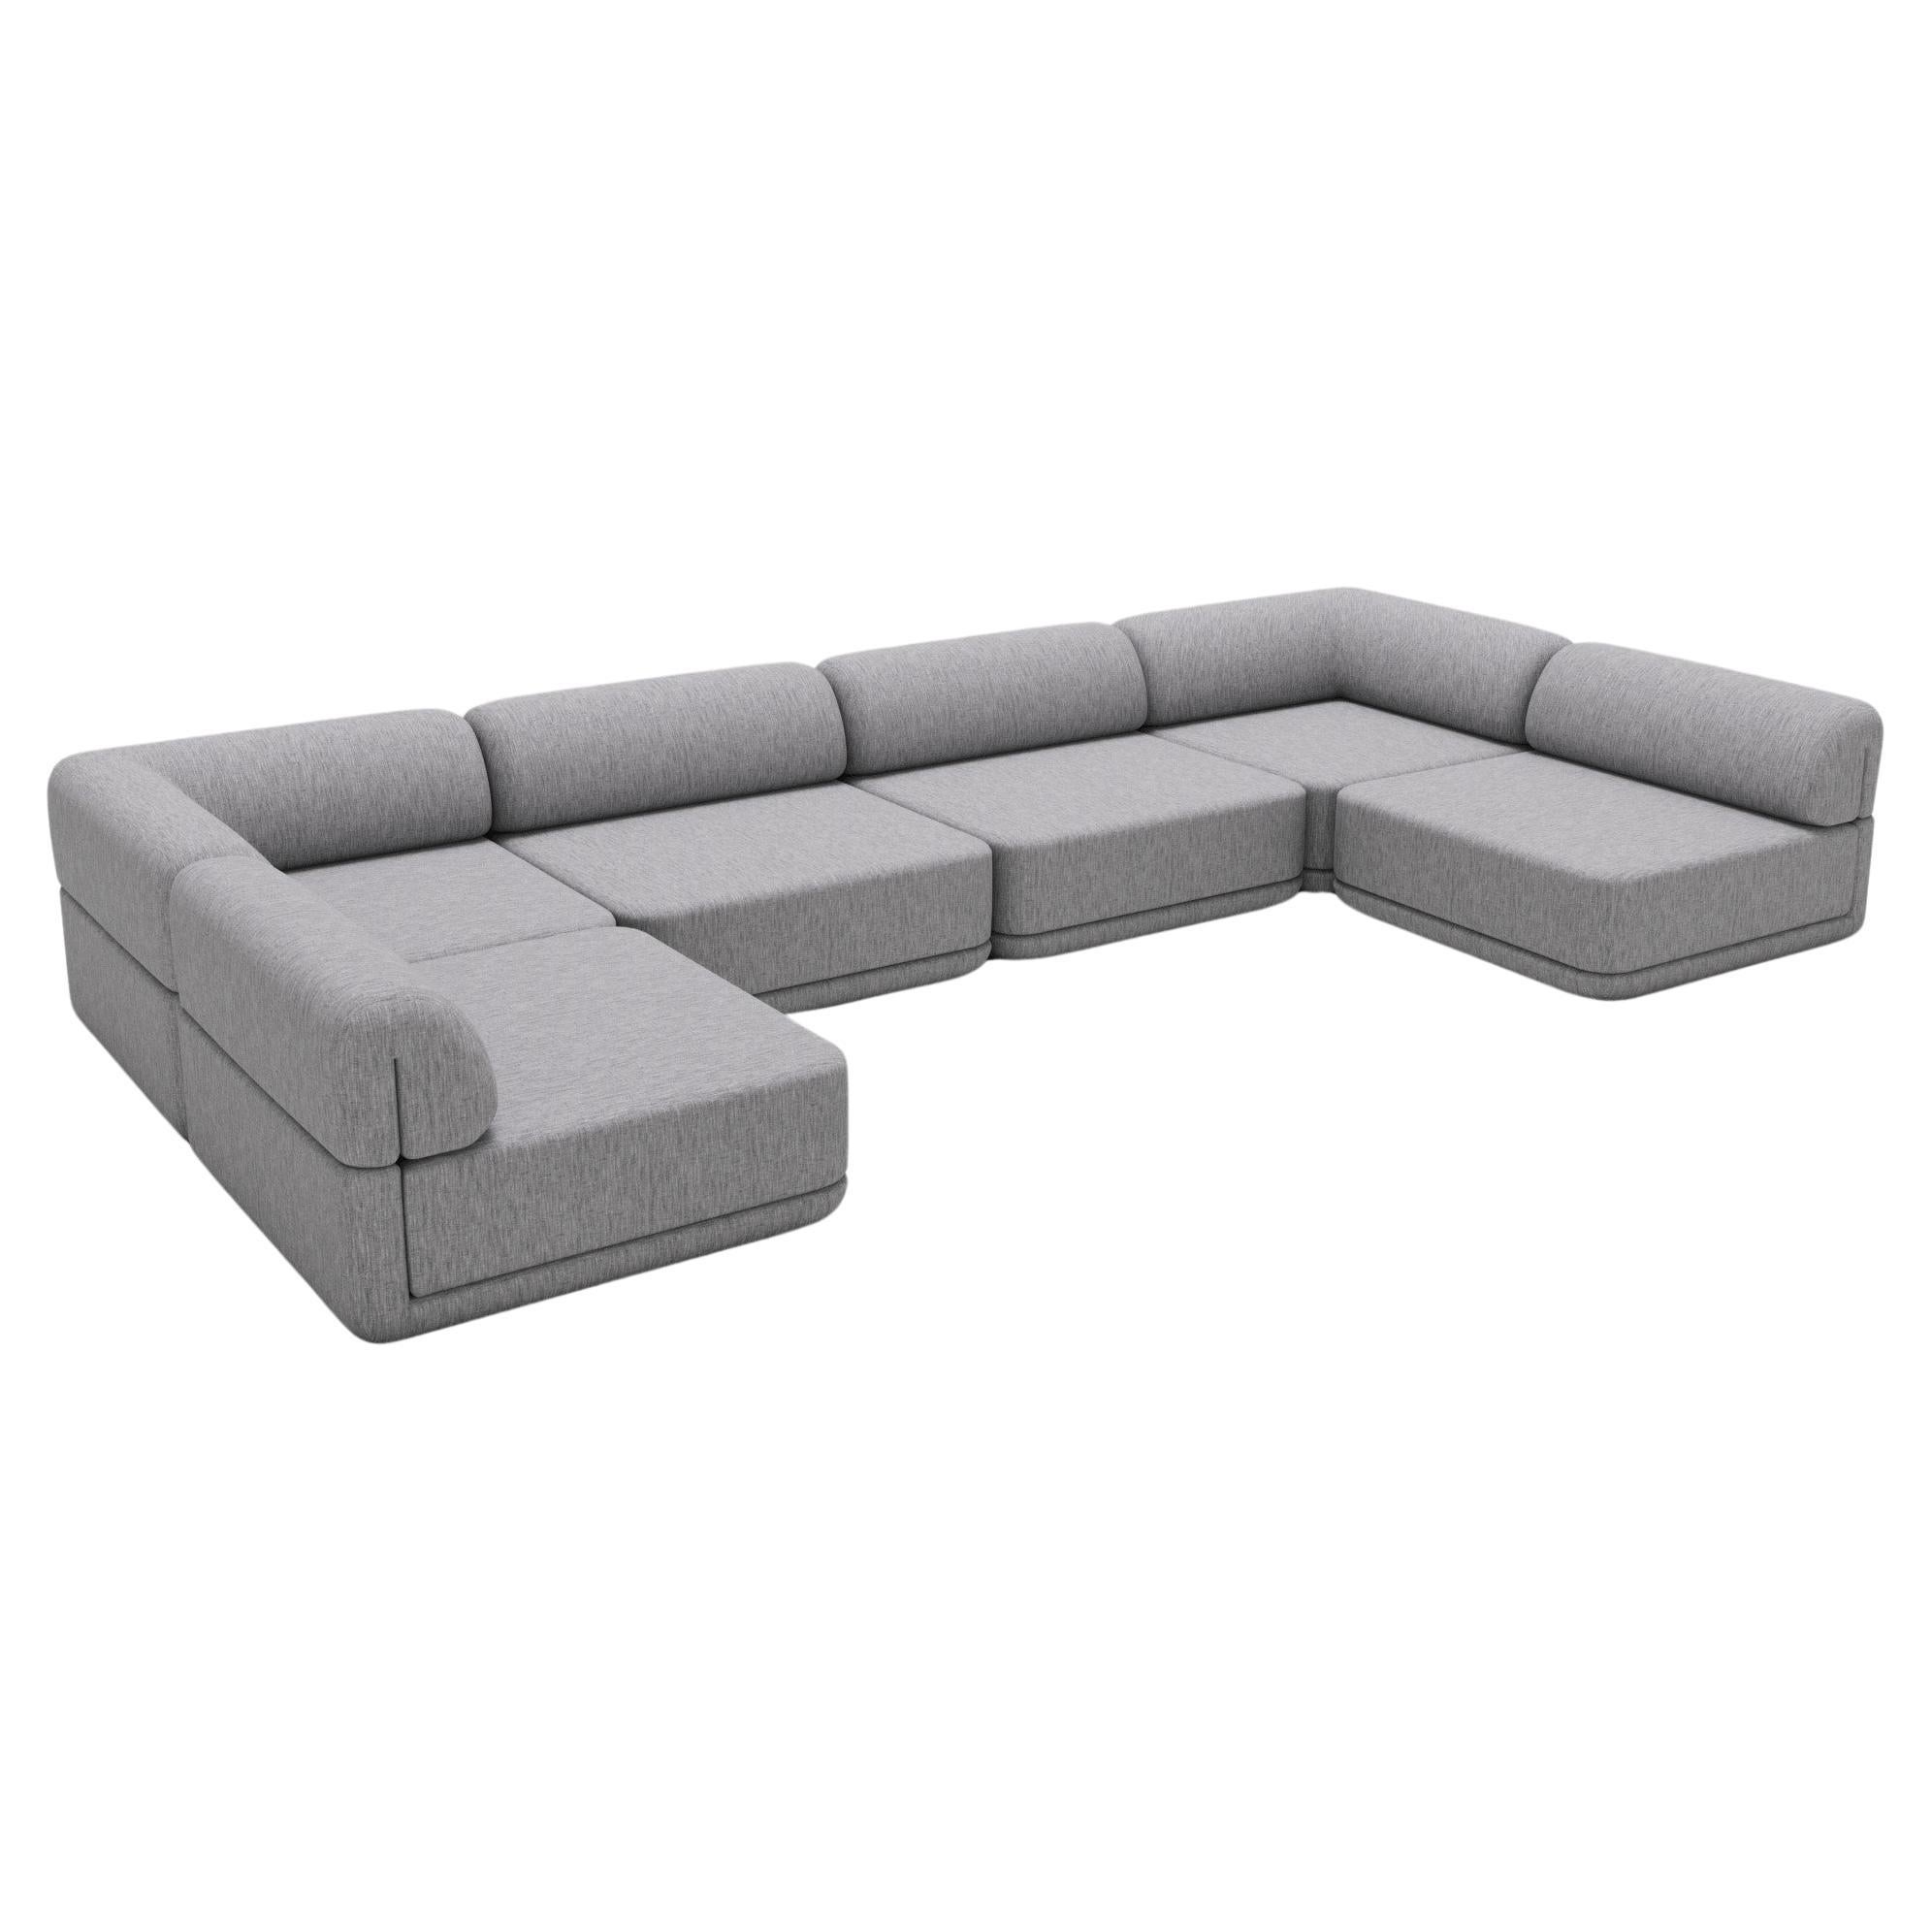 U-Shape Sectional - Inspired by 70s Italian Luxury Furniture

Discover The Cube Sofa, where art meets adaptability. Its sculptural design and customizable comfort create endless possibilities for your living space. Make a statement, elevate your